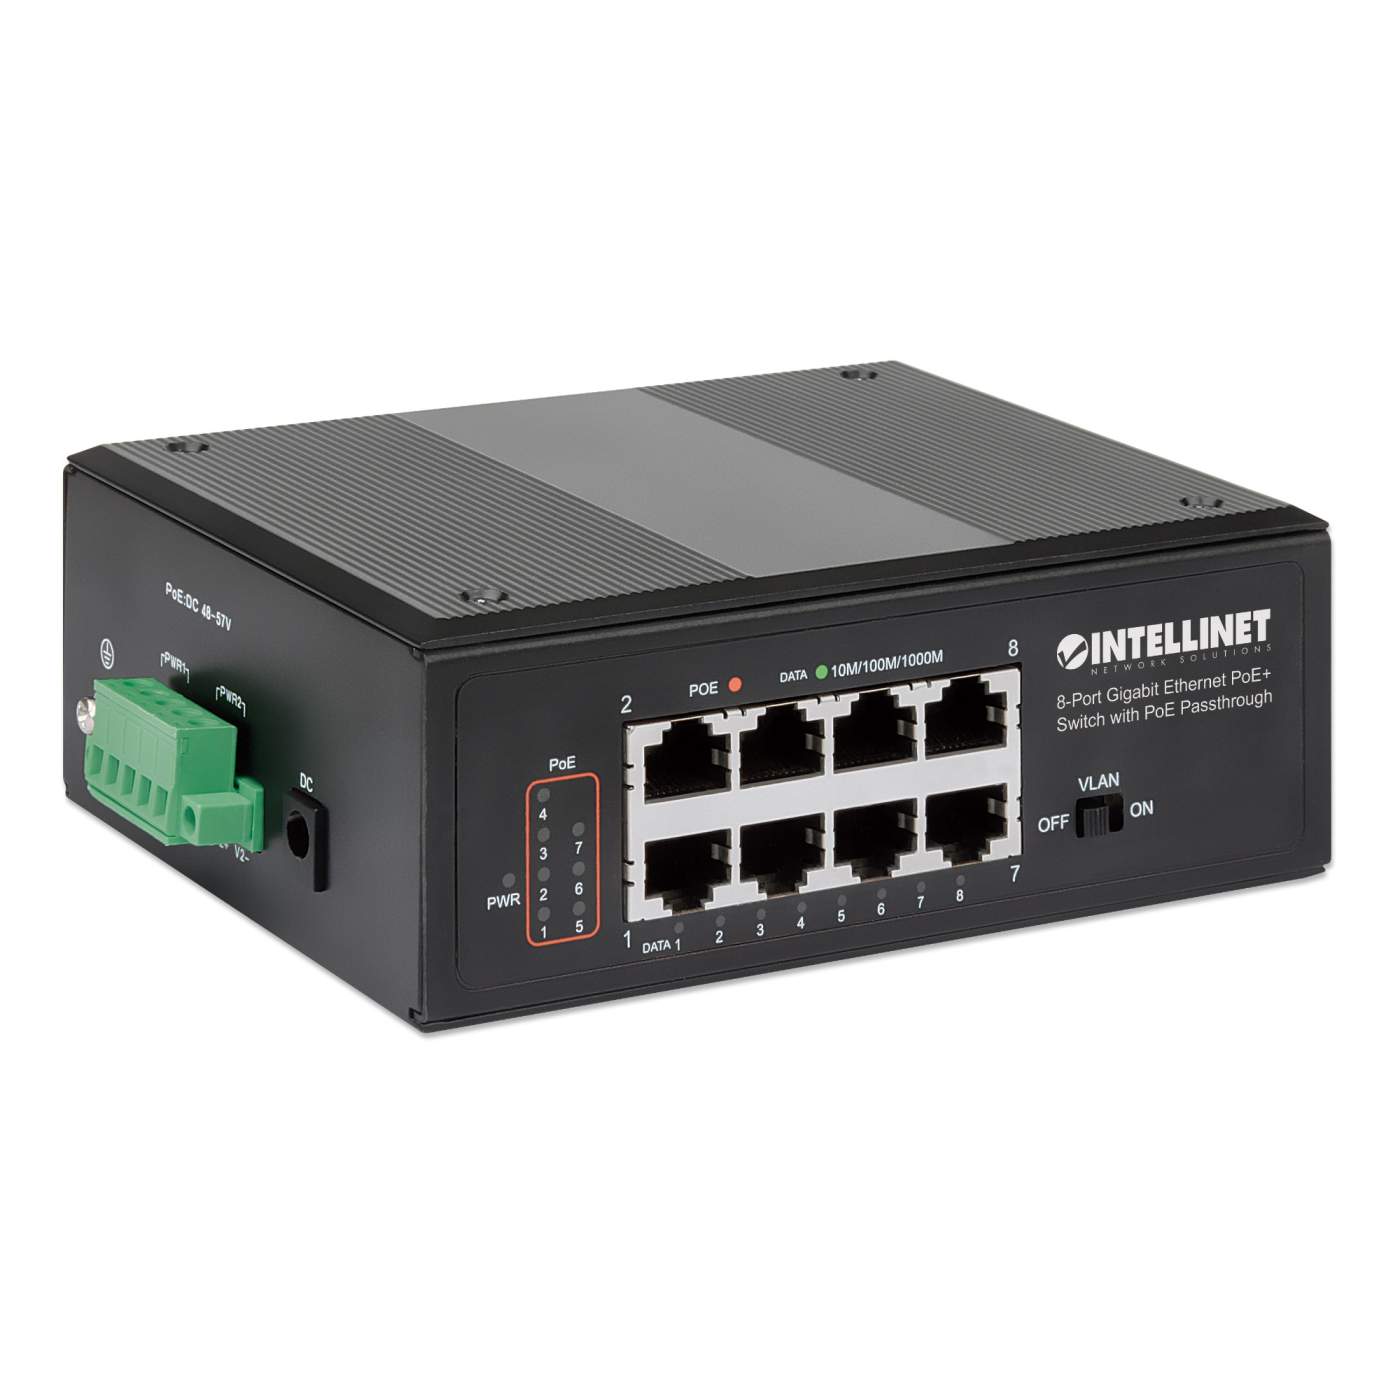 PoE-Powered 8-Port GbE PoE+ Industrial Switch w/ PoE Passthrough